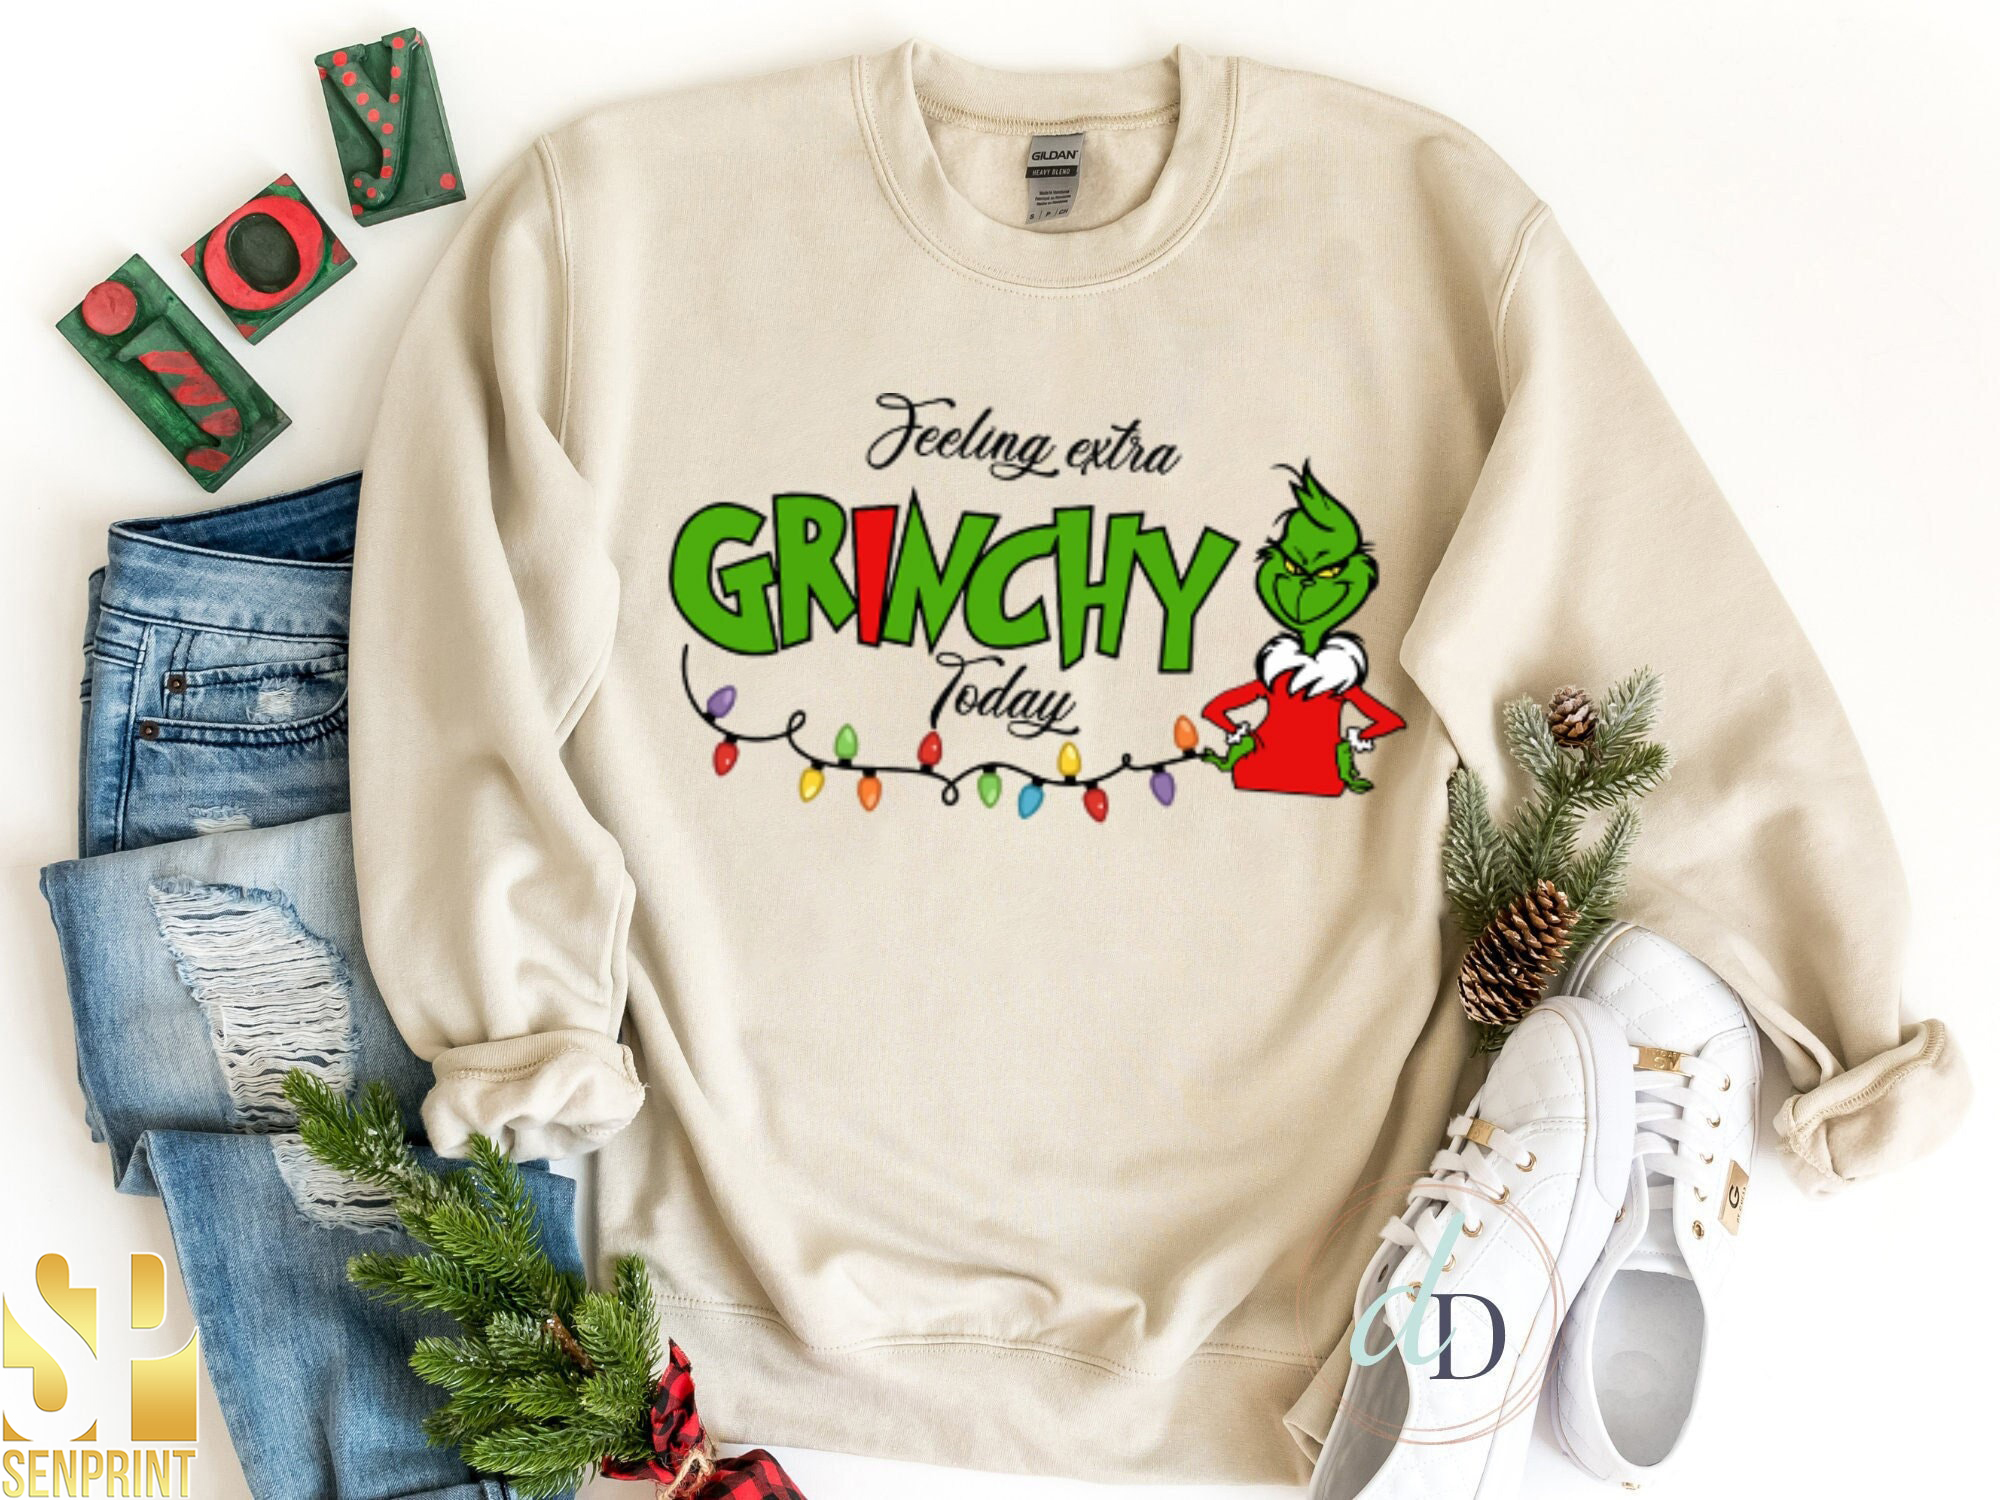 Get Grinchy This Christmas The Perfect Gift for a Heart-Warming Holiday